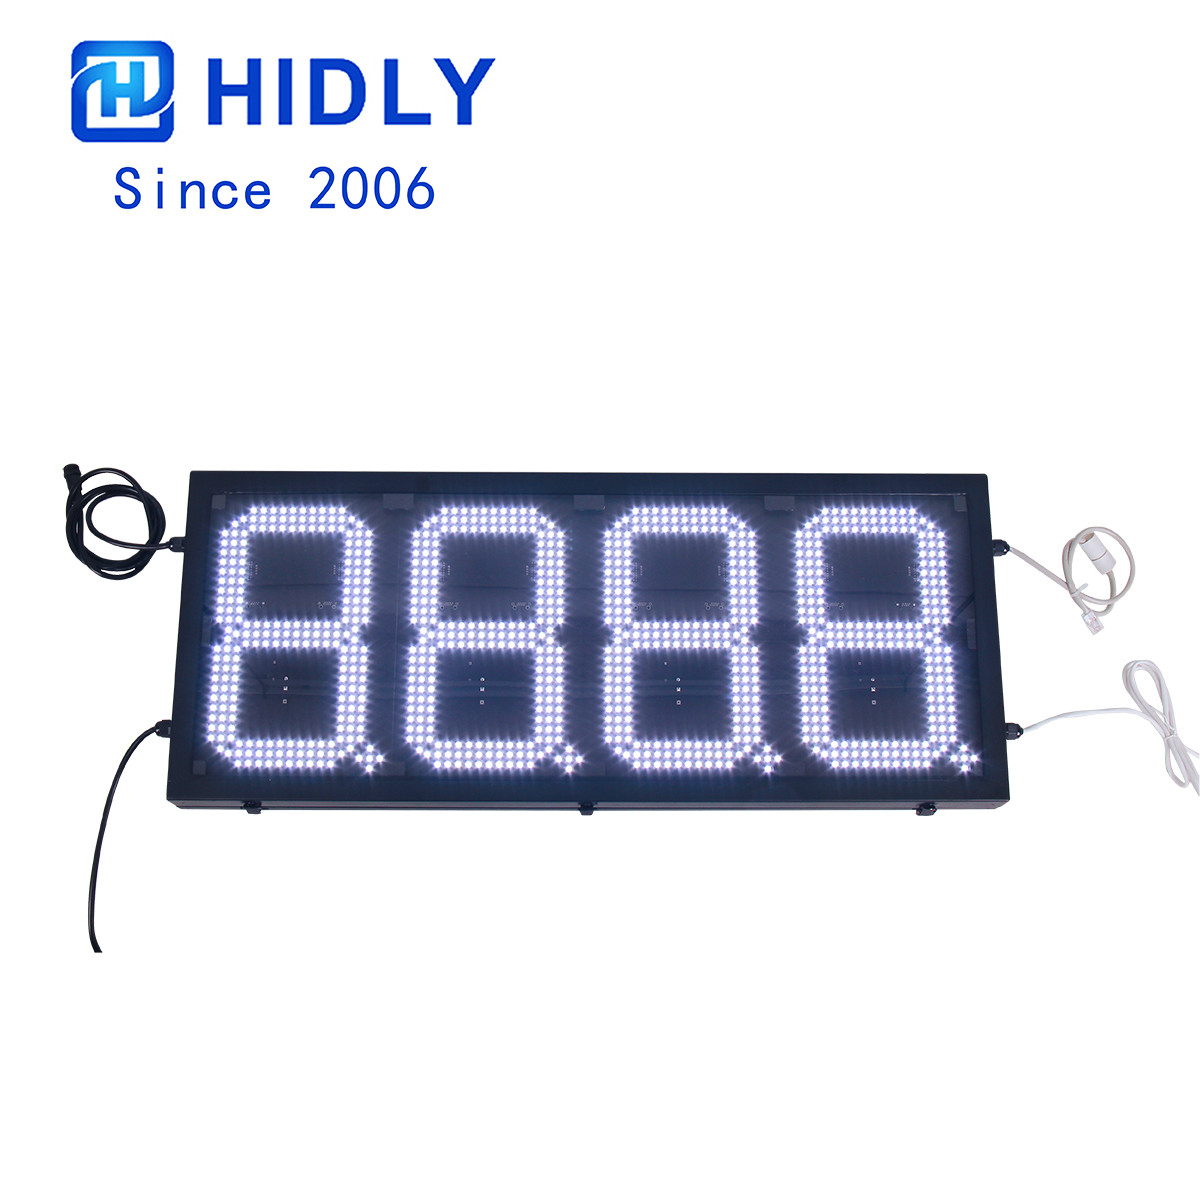 Mongolia 10 Inch White Super Bright Led Gas Price Display